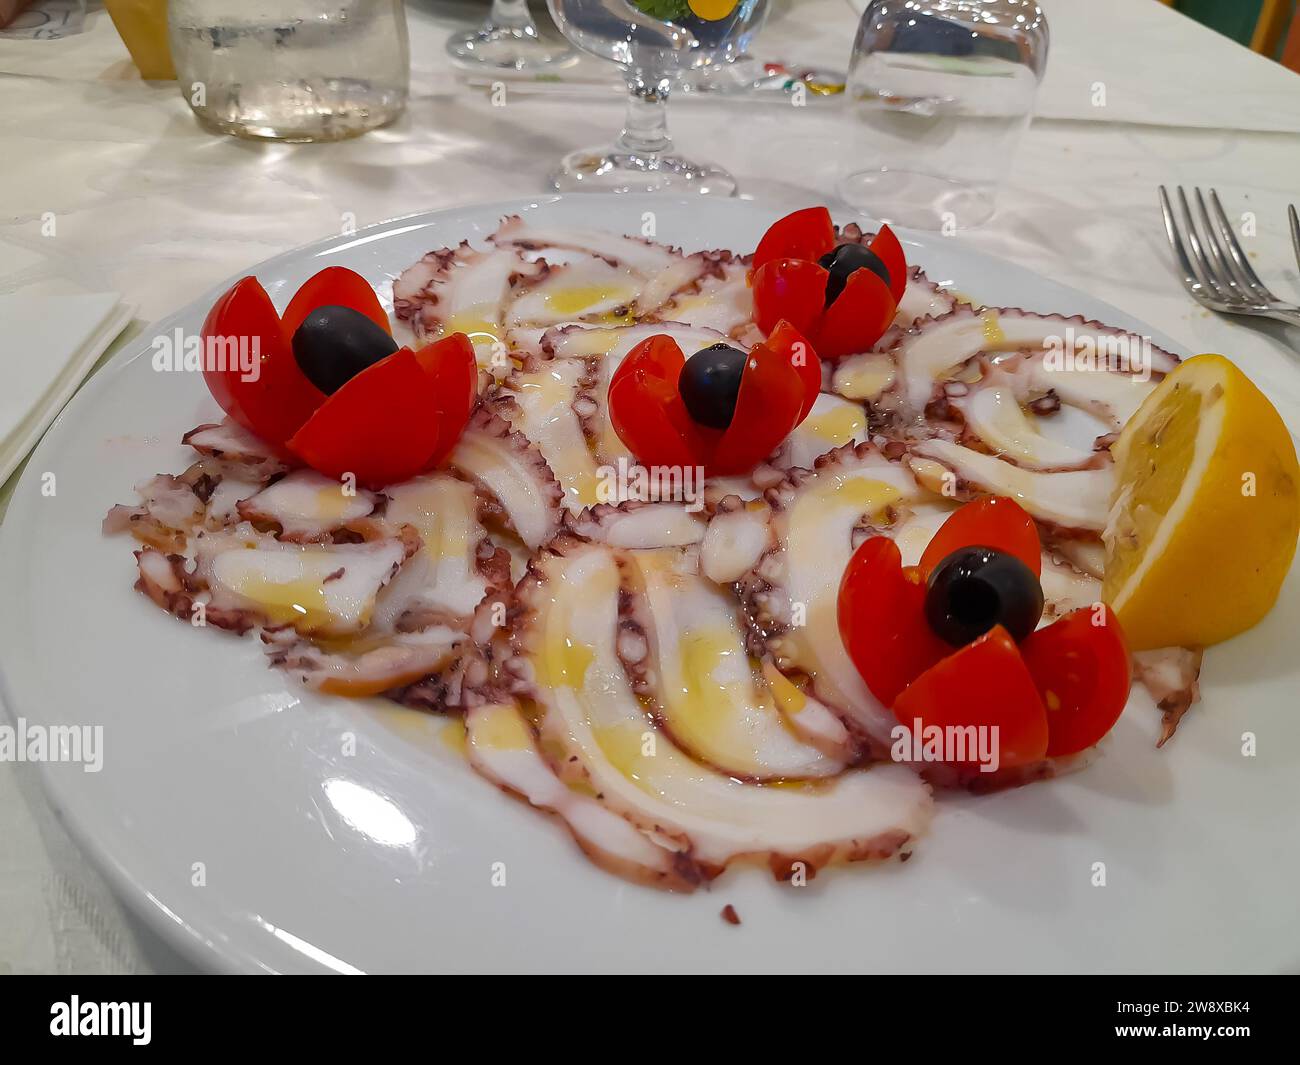 Italian-style octopus carpaccio involves thin slices of cooked octopus with red tomato Stock Photo